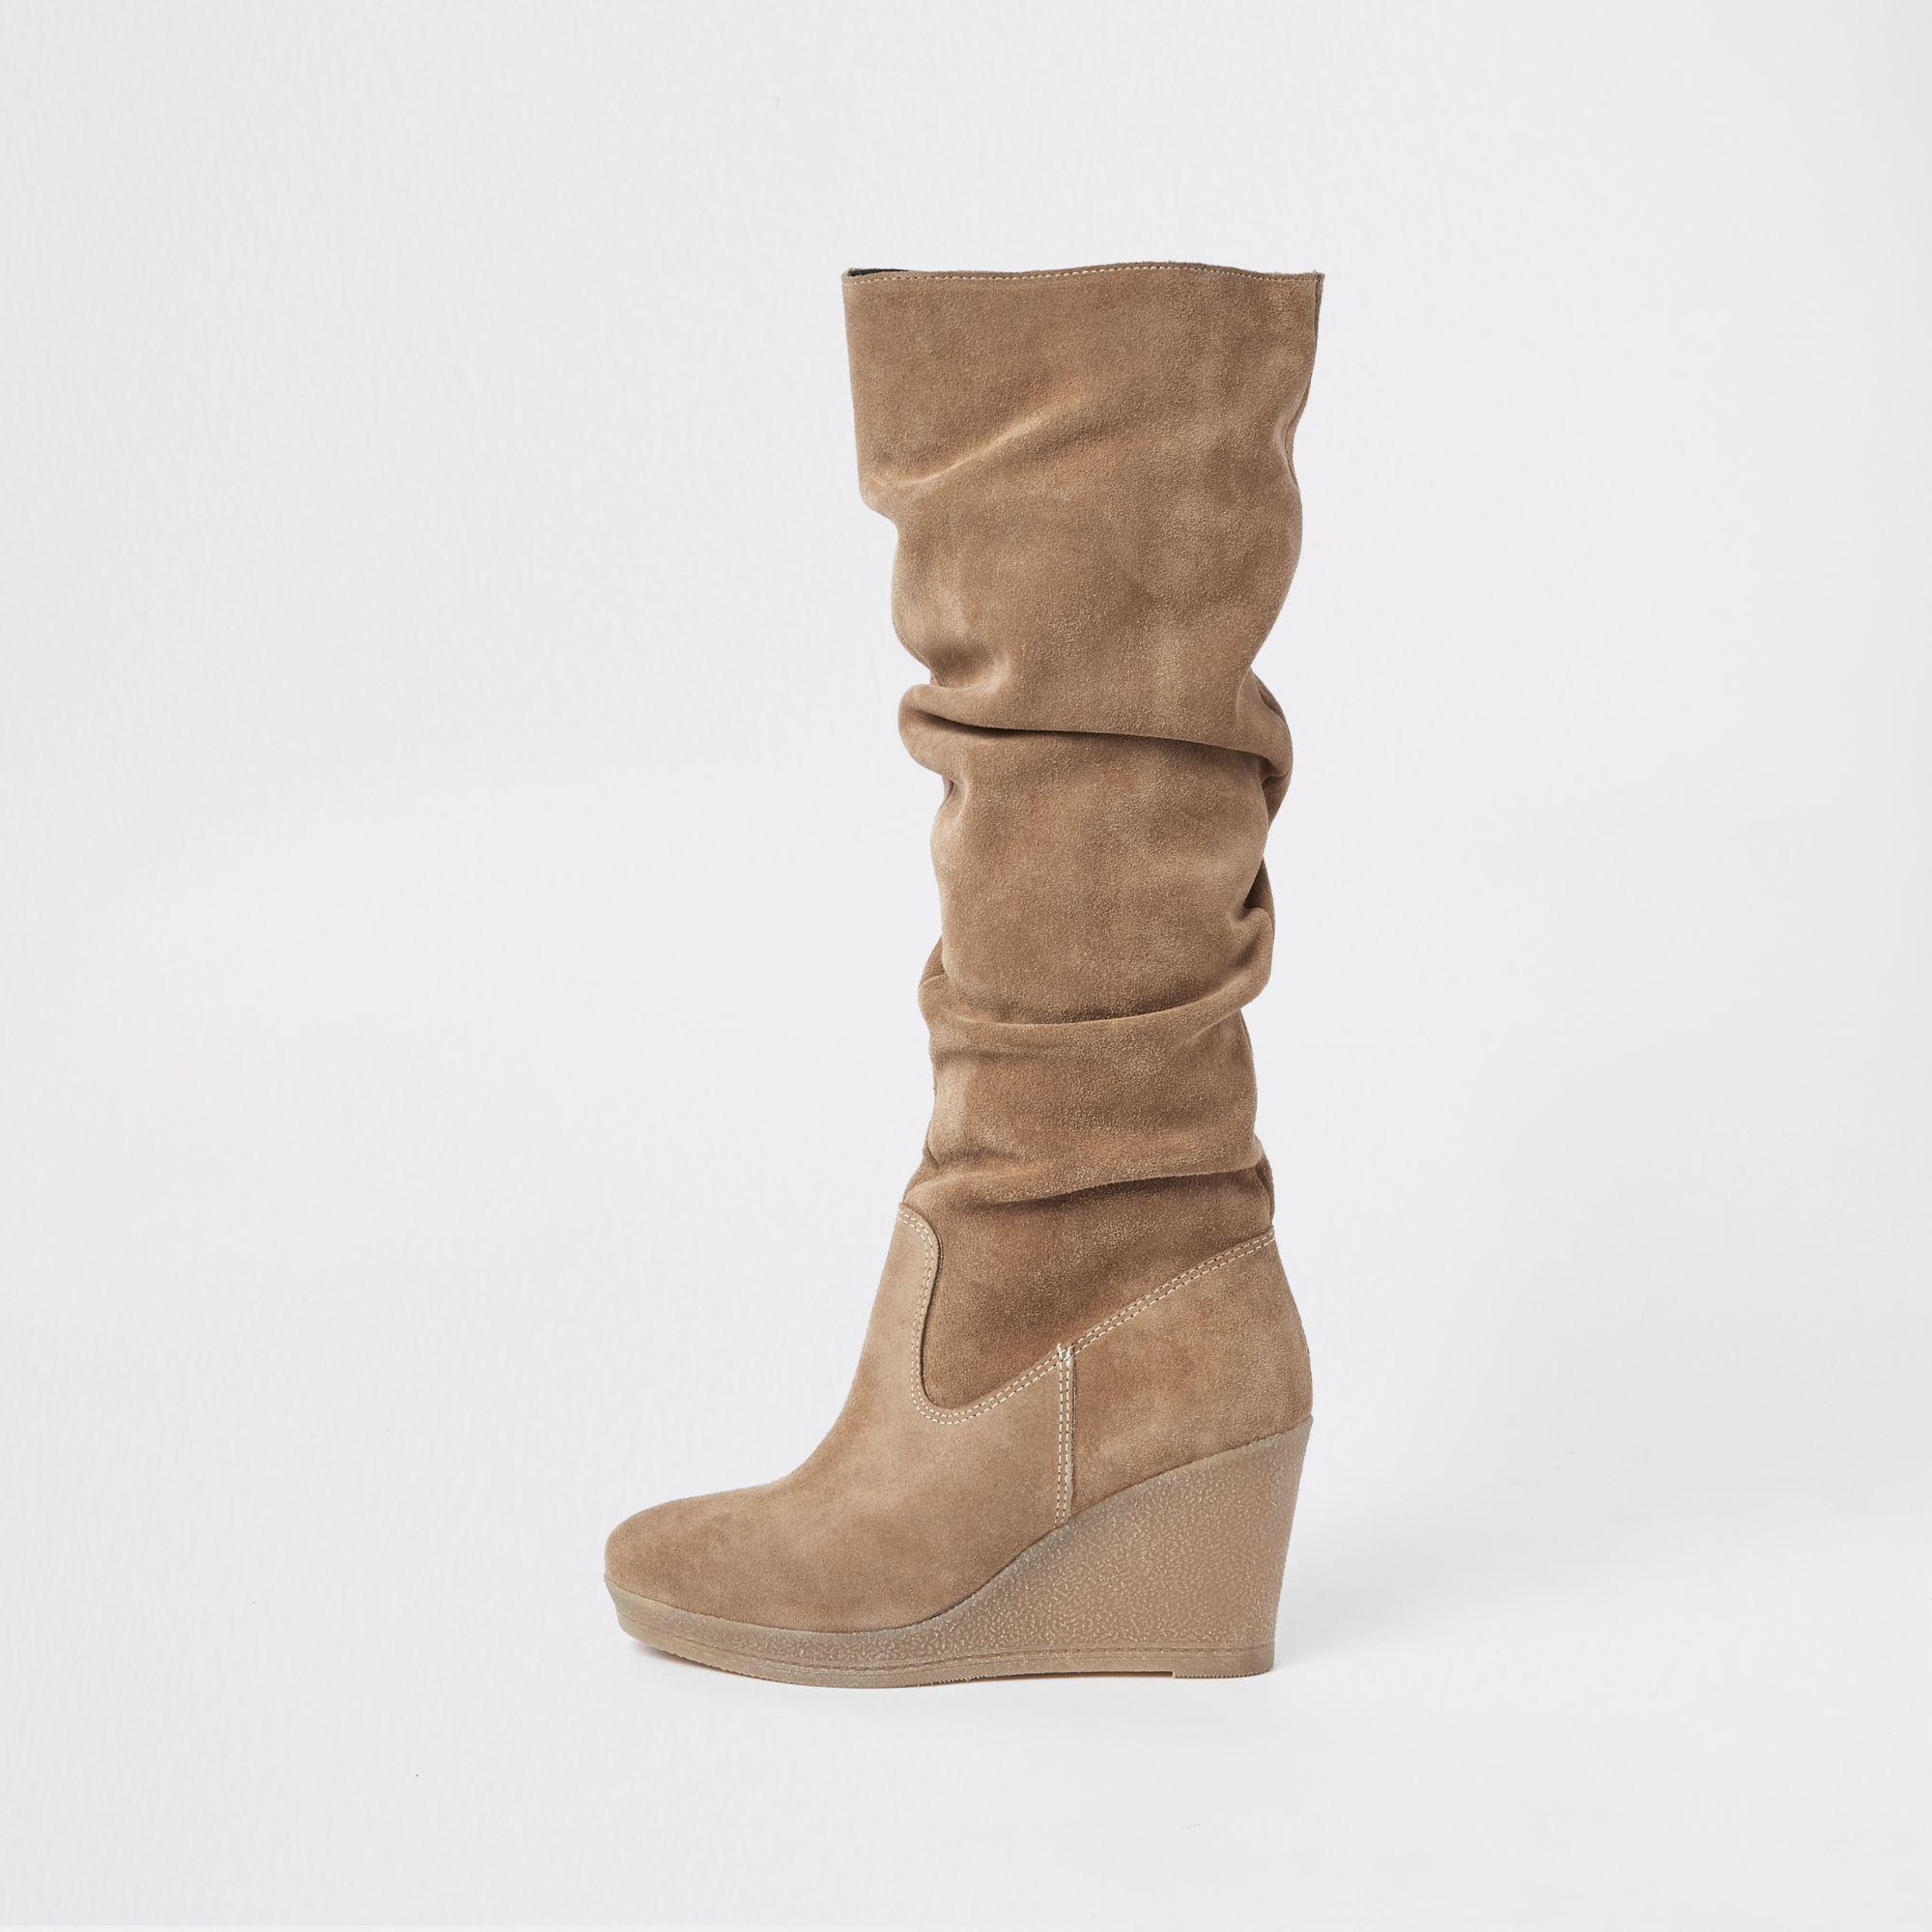 Knee High Boots With Wedge | rededuct.com